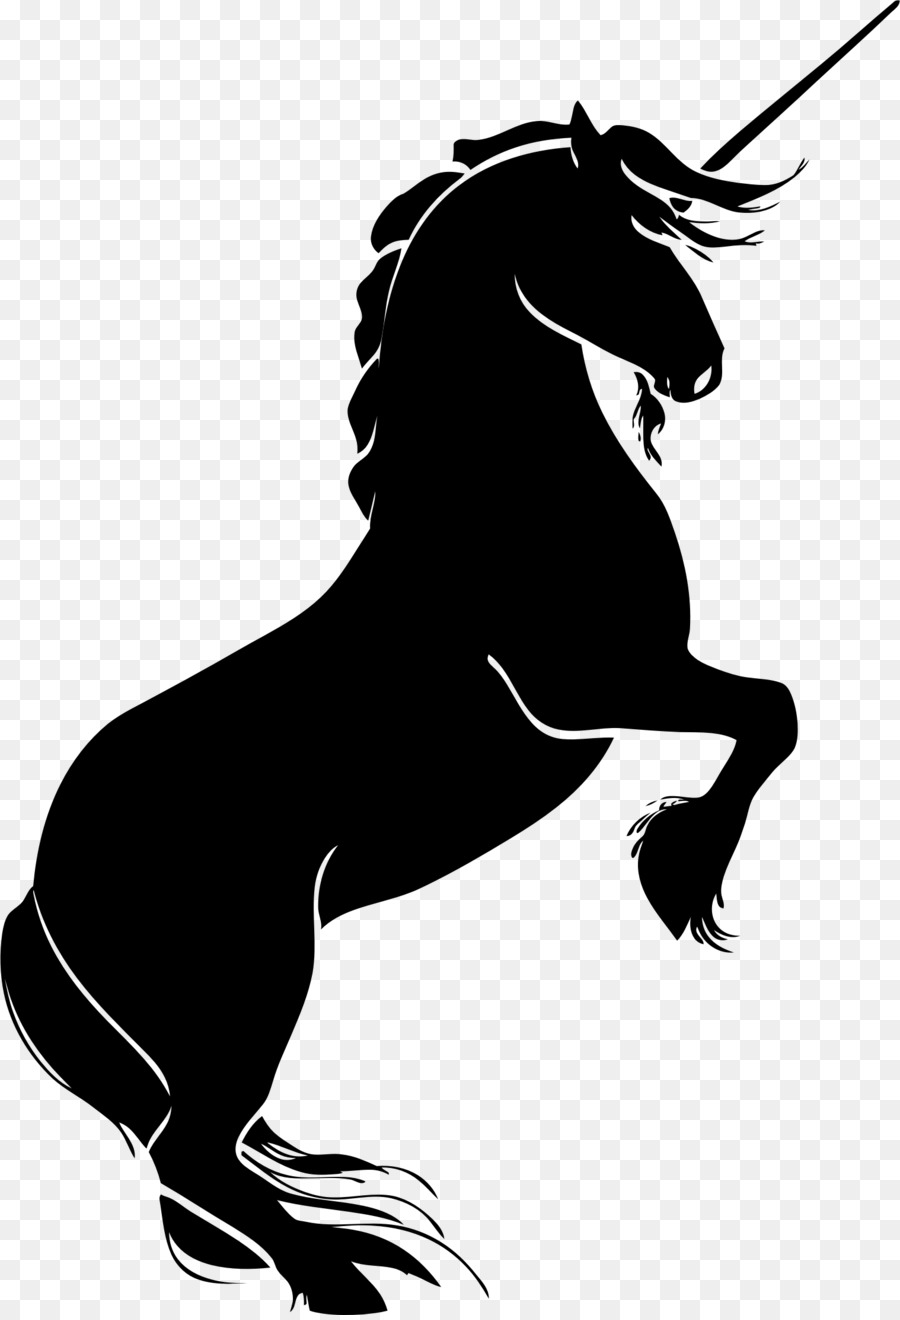 Horse Stallion Rearing Silhouette Clip art - horse png download - 529* ...